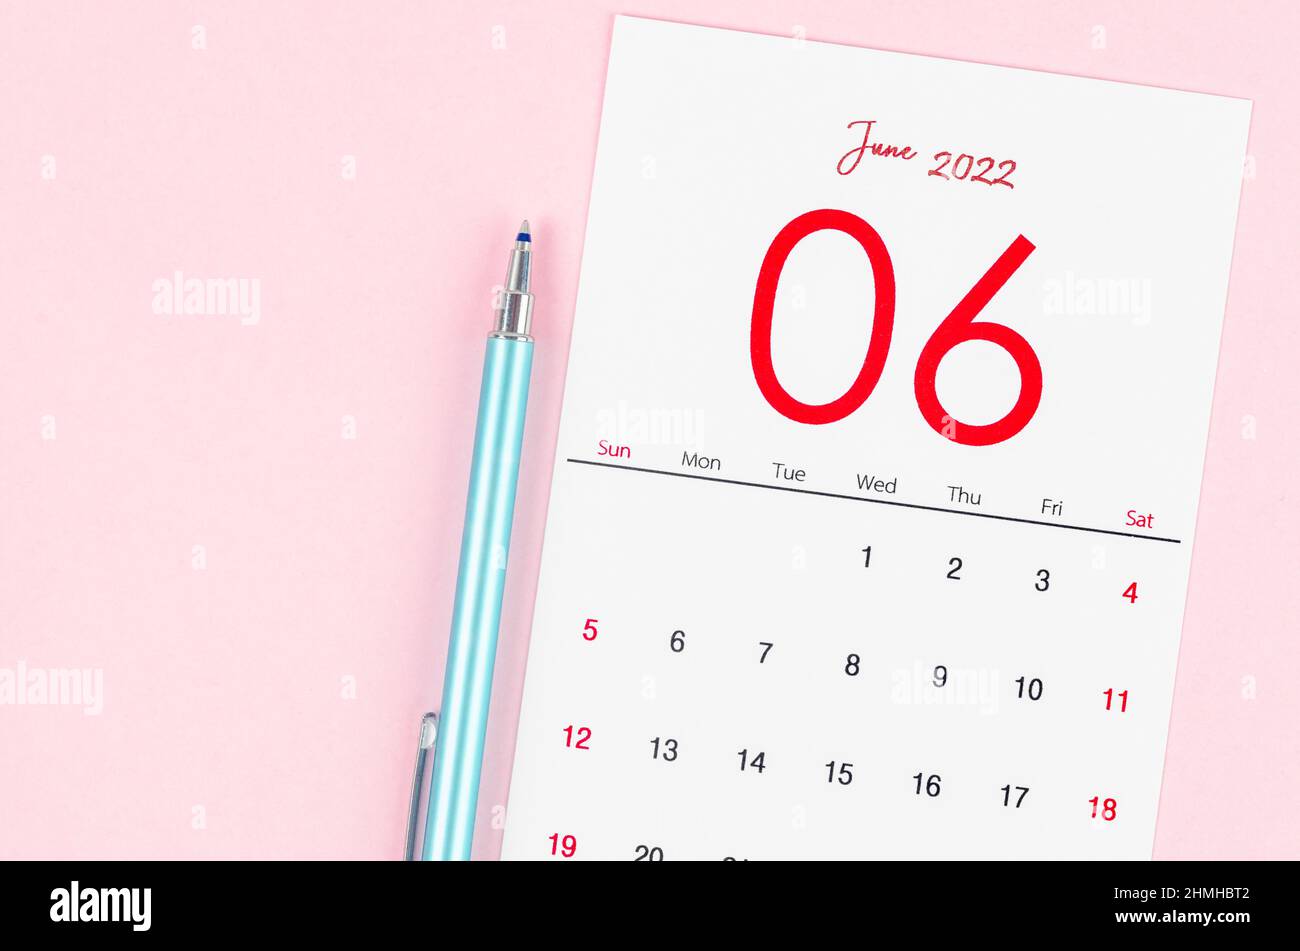 The June 2022 calendar with pen on pink background. Stock Photo